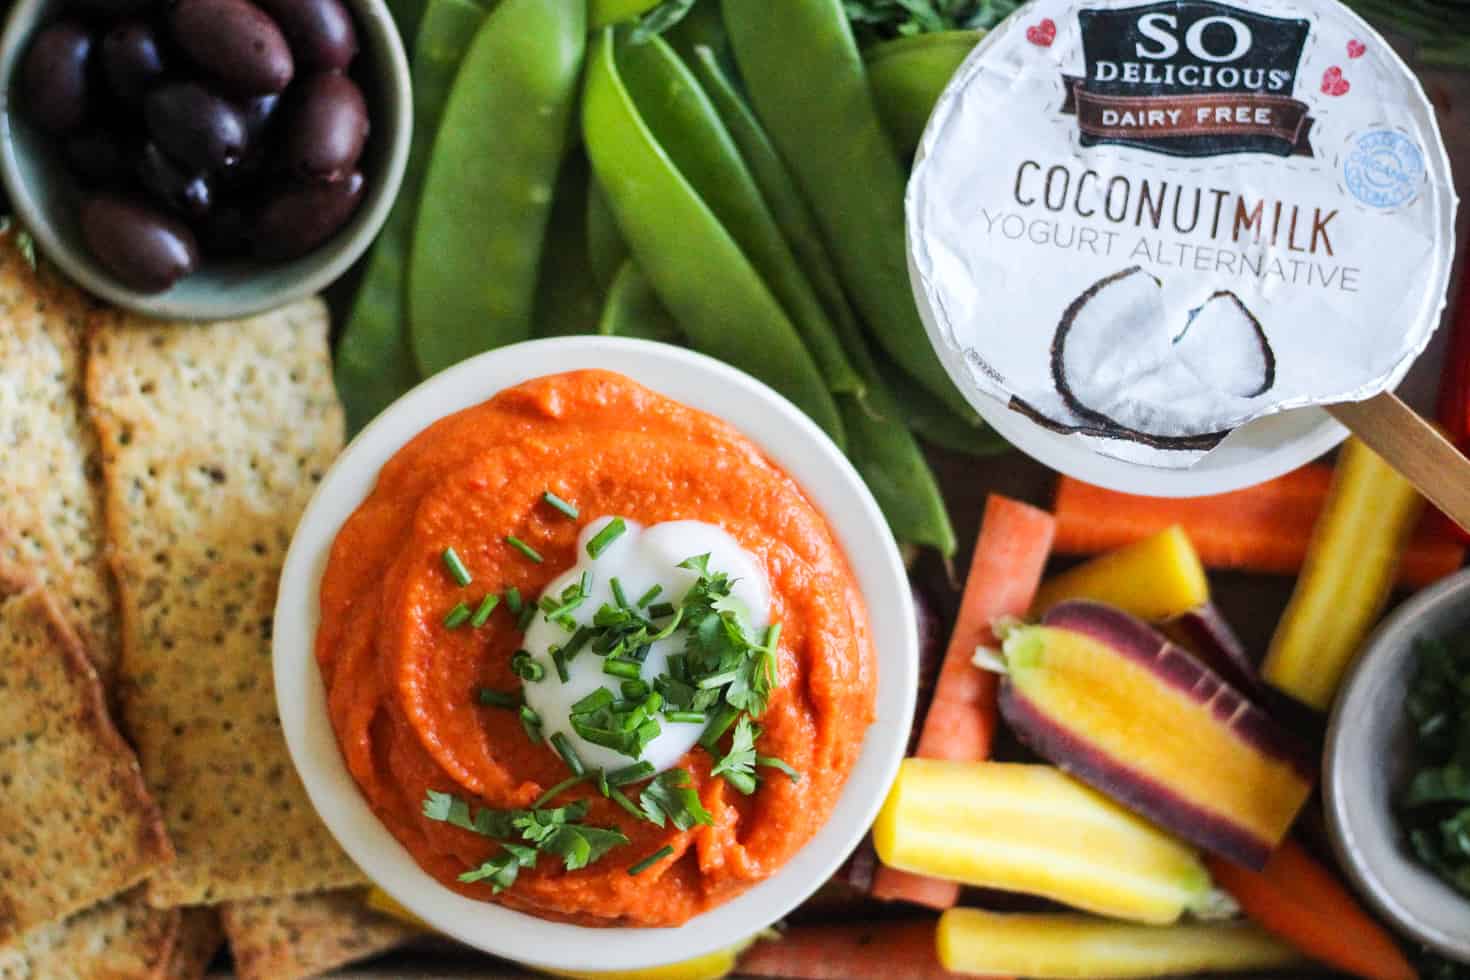 Lentil Dip on party board with So Delicious yogurt.